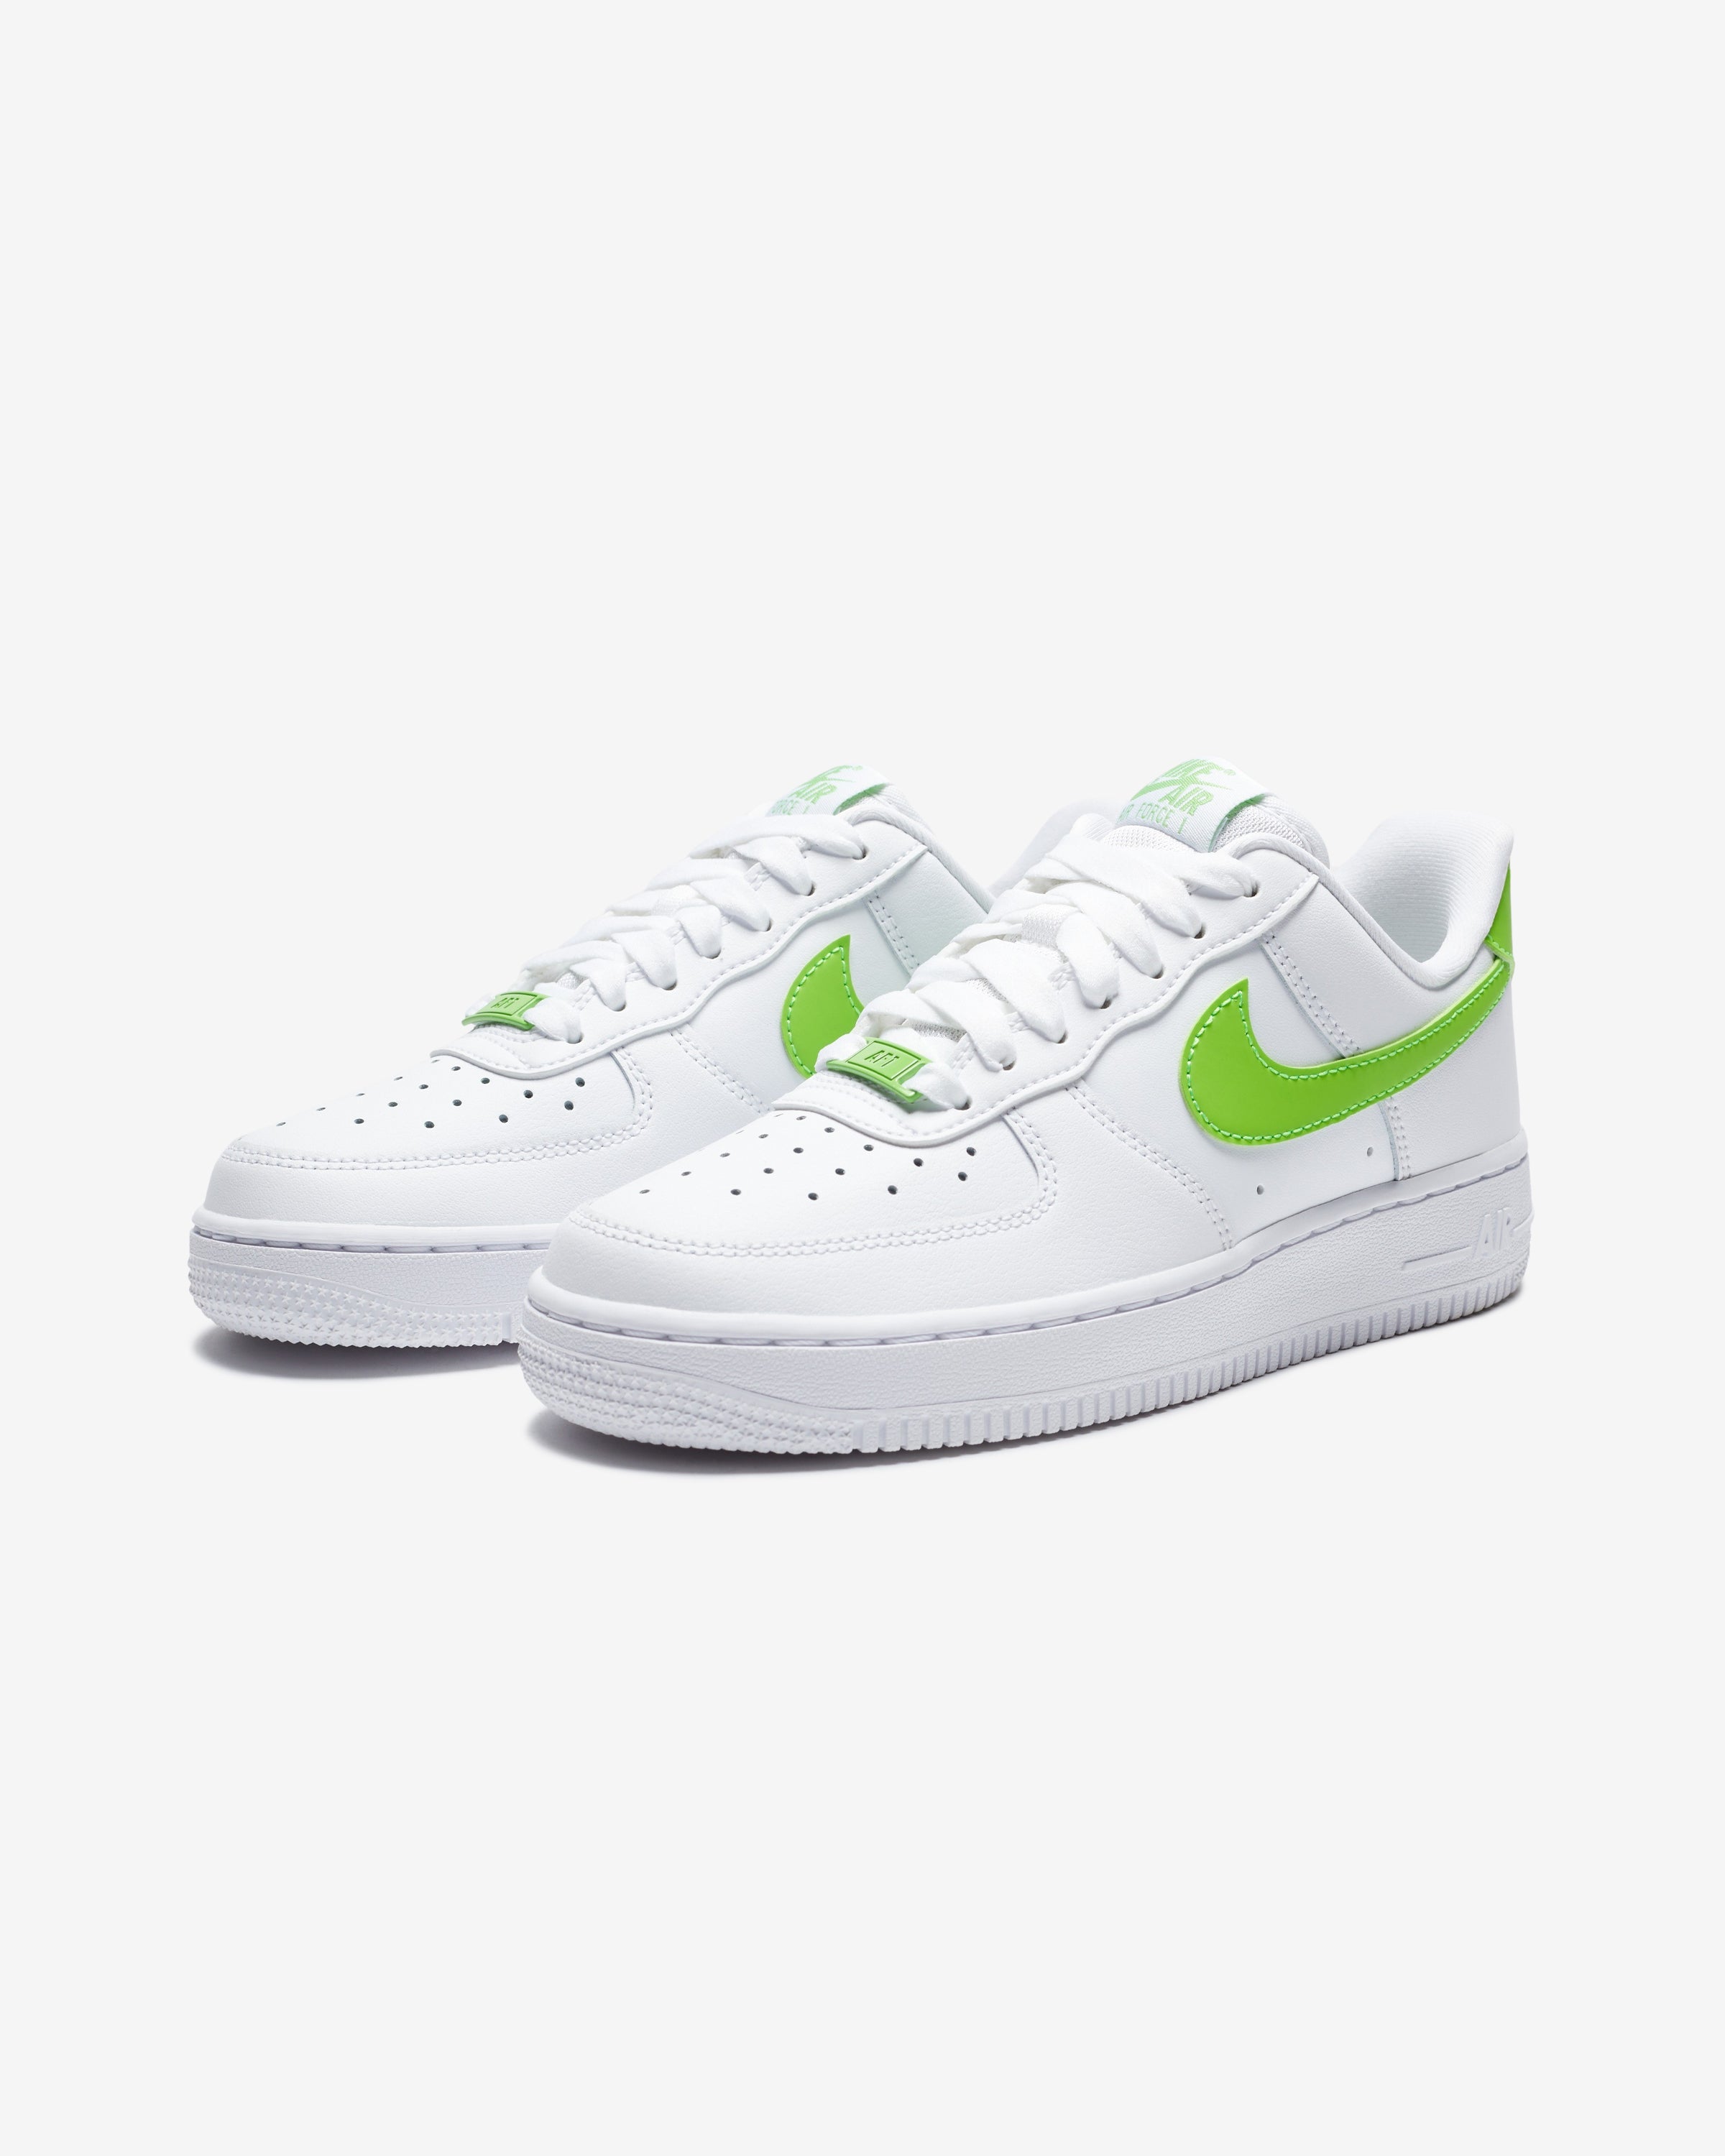 NIKE WOMEN'S AIR FORCE 1 '07 - WHITE/ ACTIONGREEN